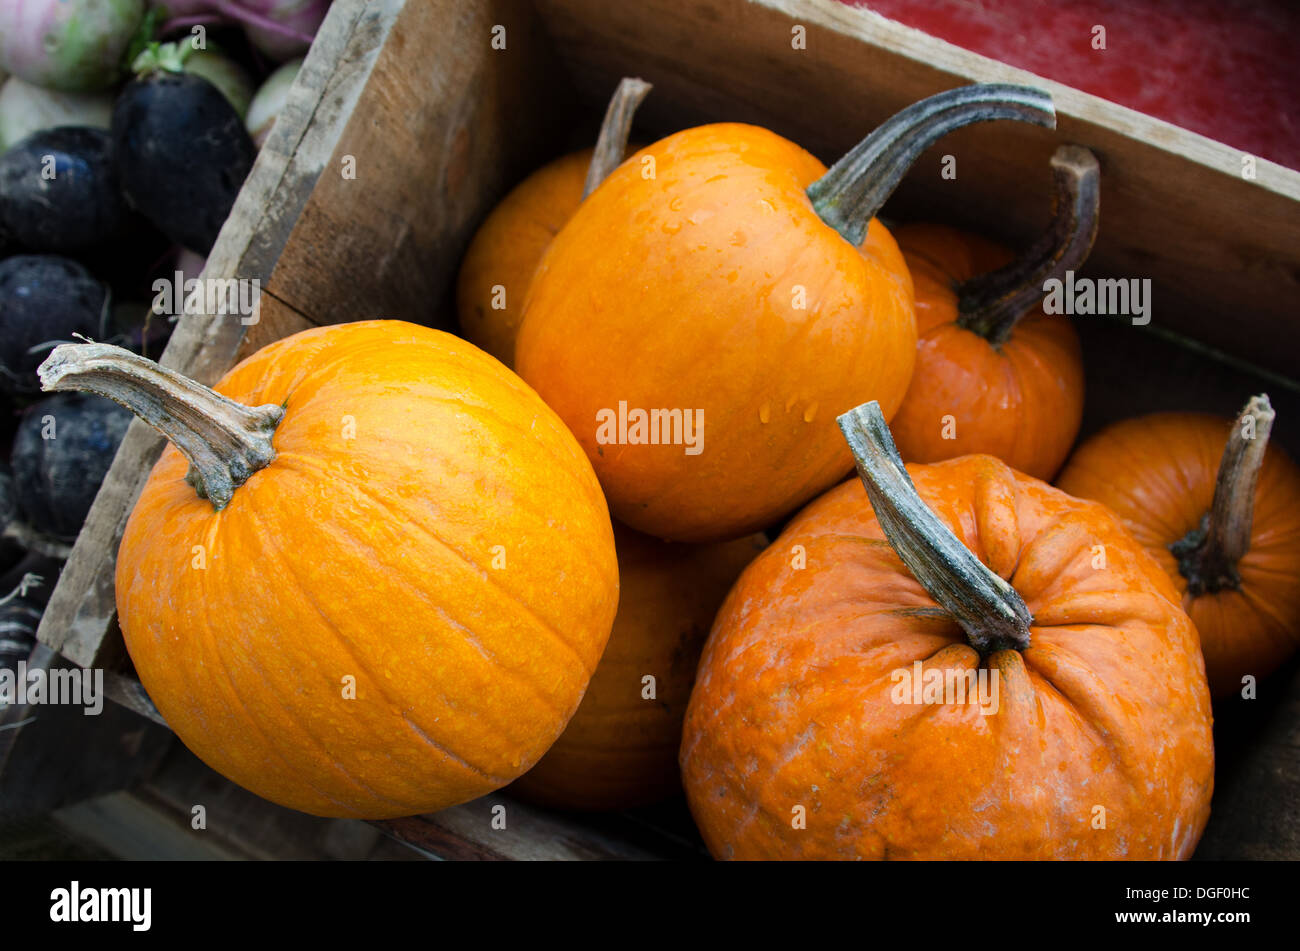 Rain falling on a crate of New England Pie Pumpkins at the organic farmers' market. Stock Photo